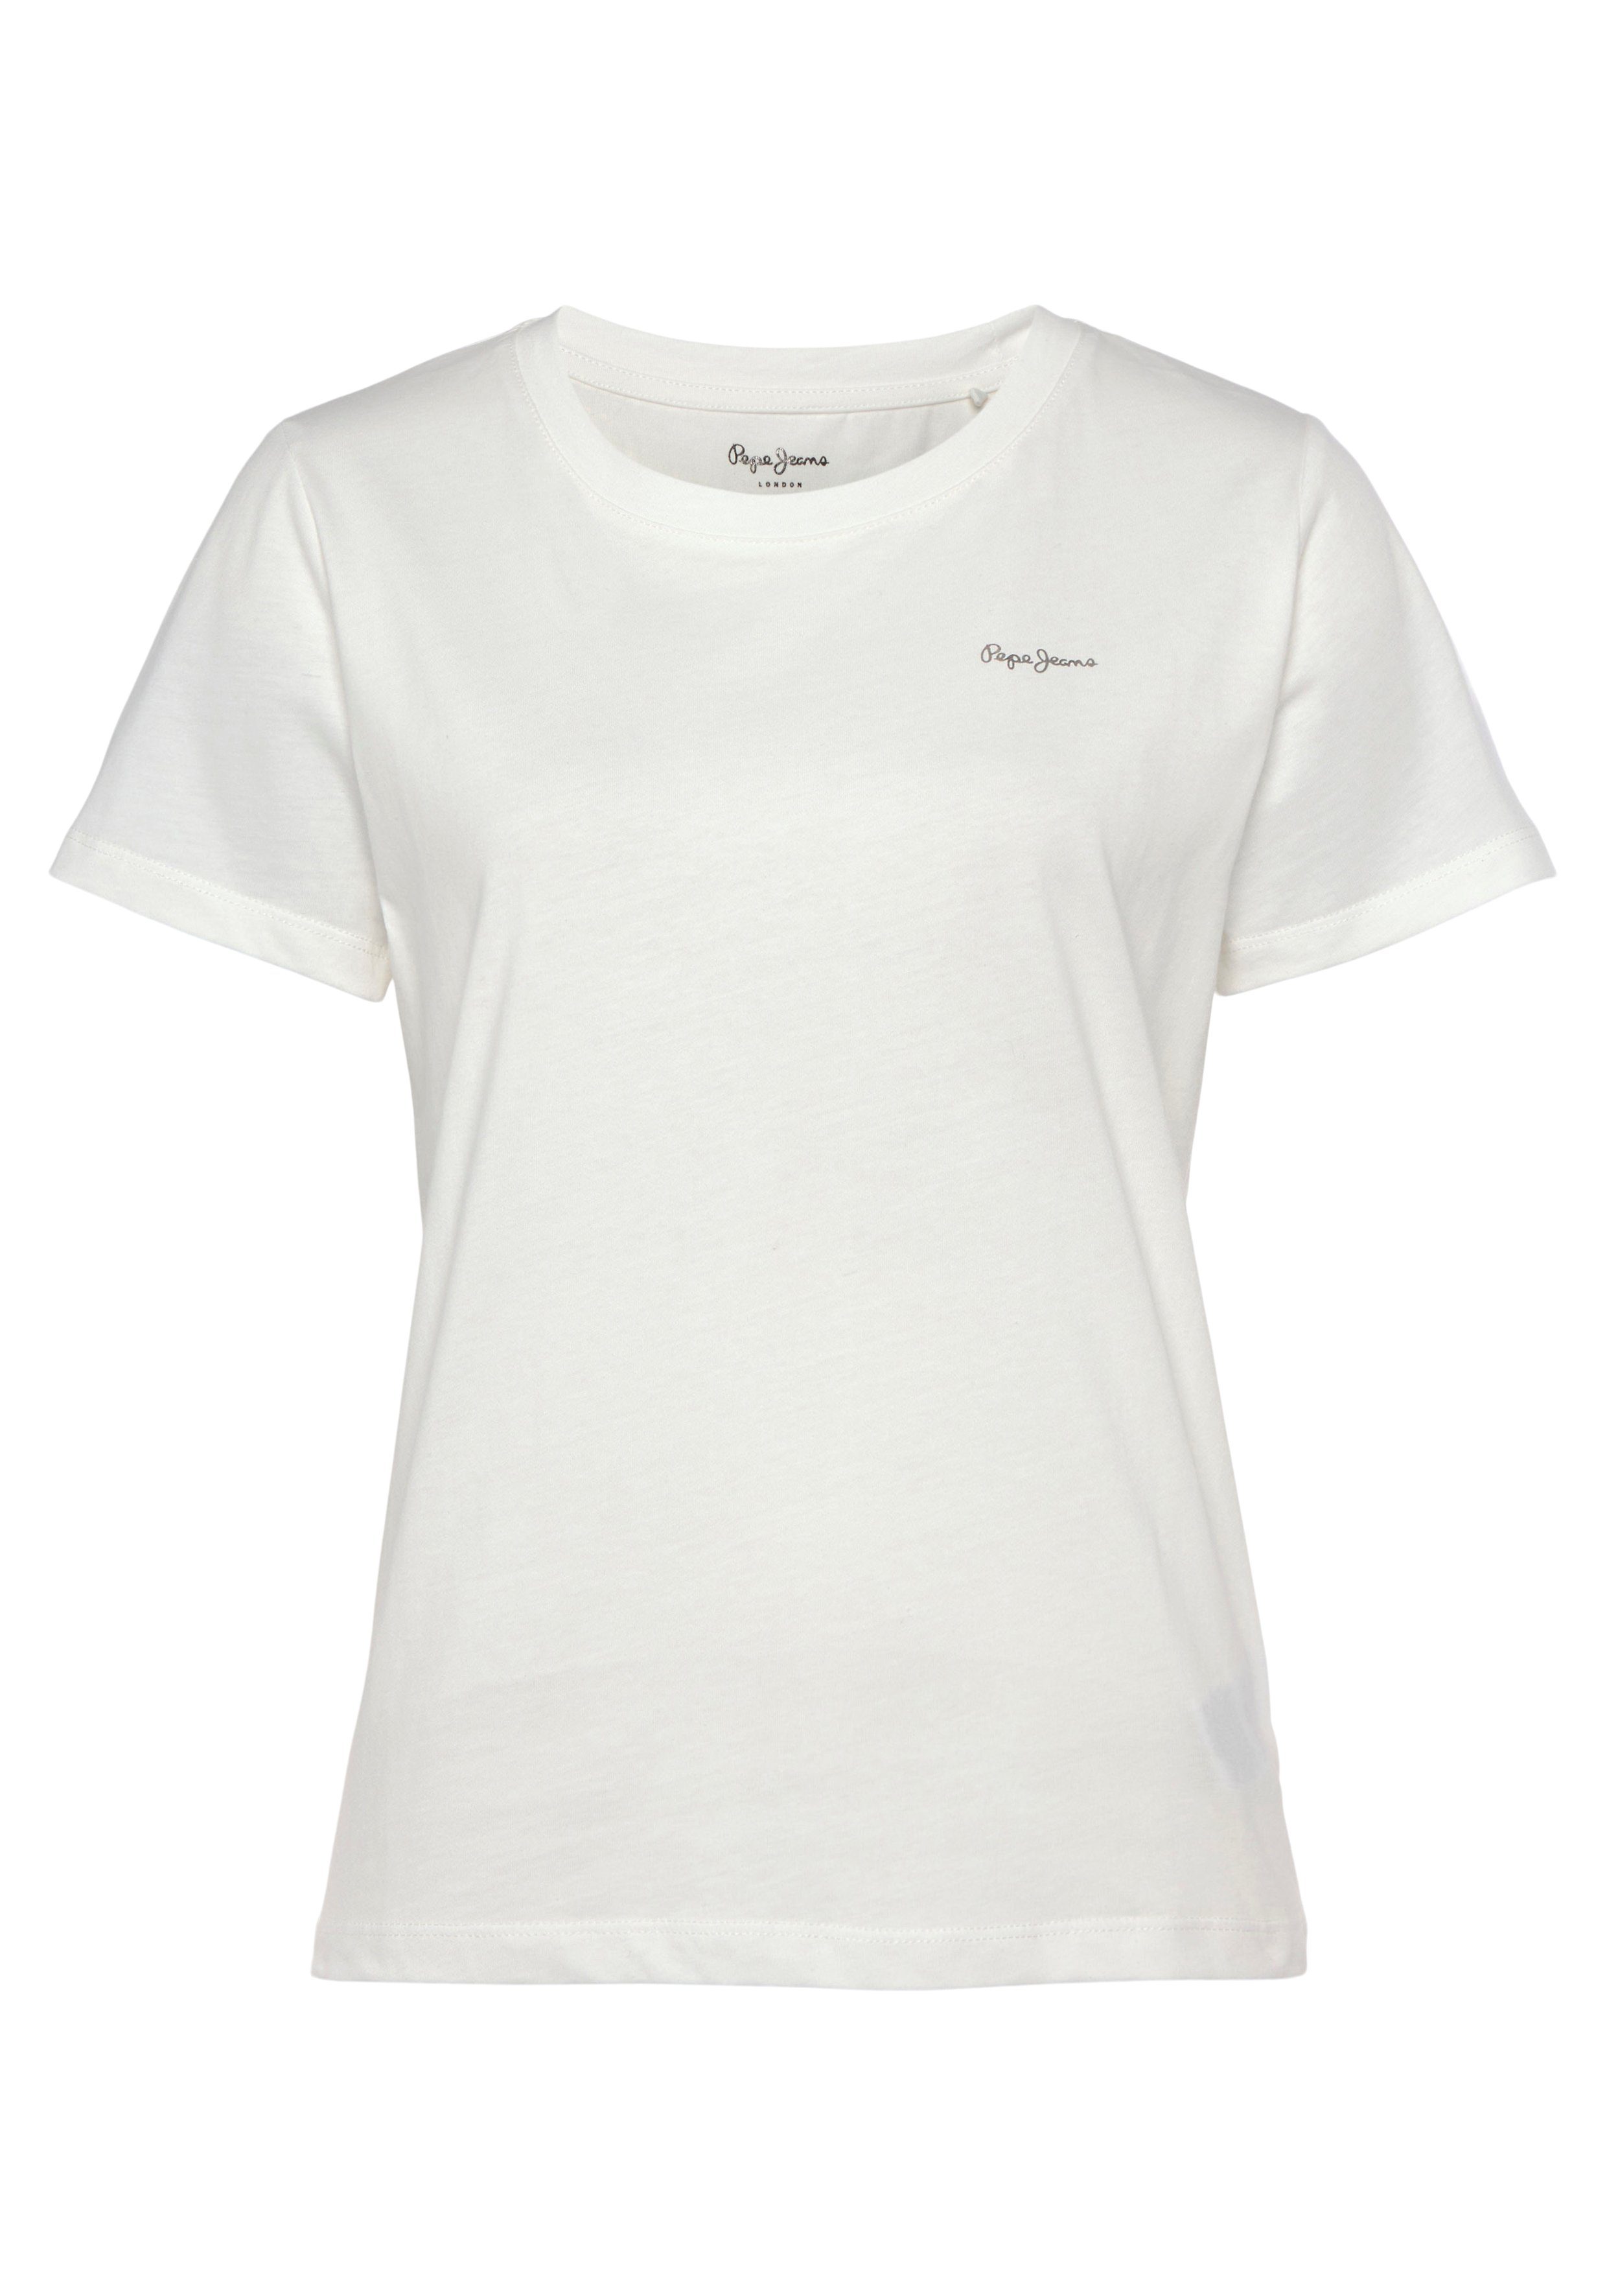 Pepe Jeans T-Shirt TOMITA offwhite